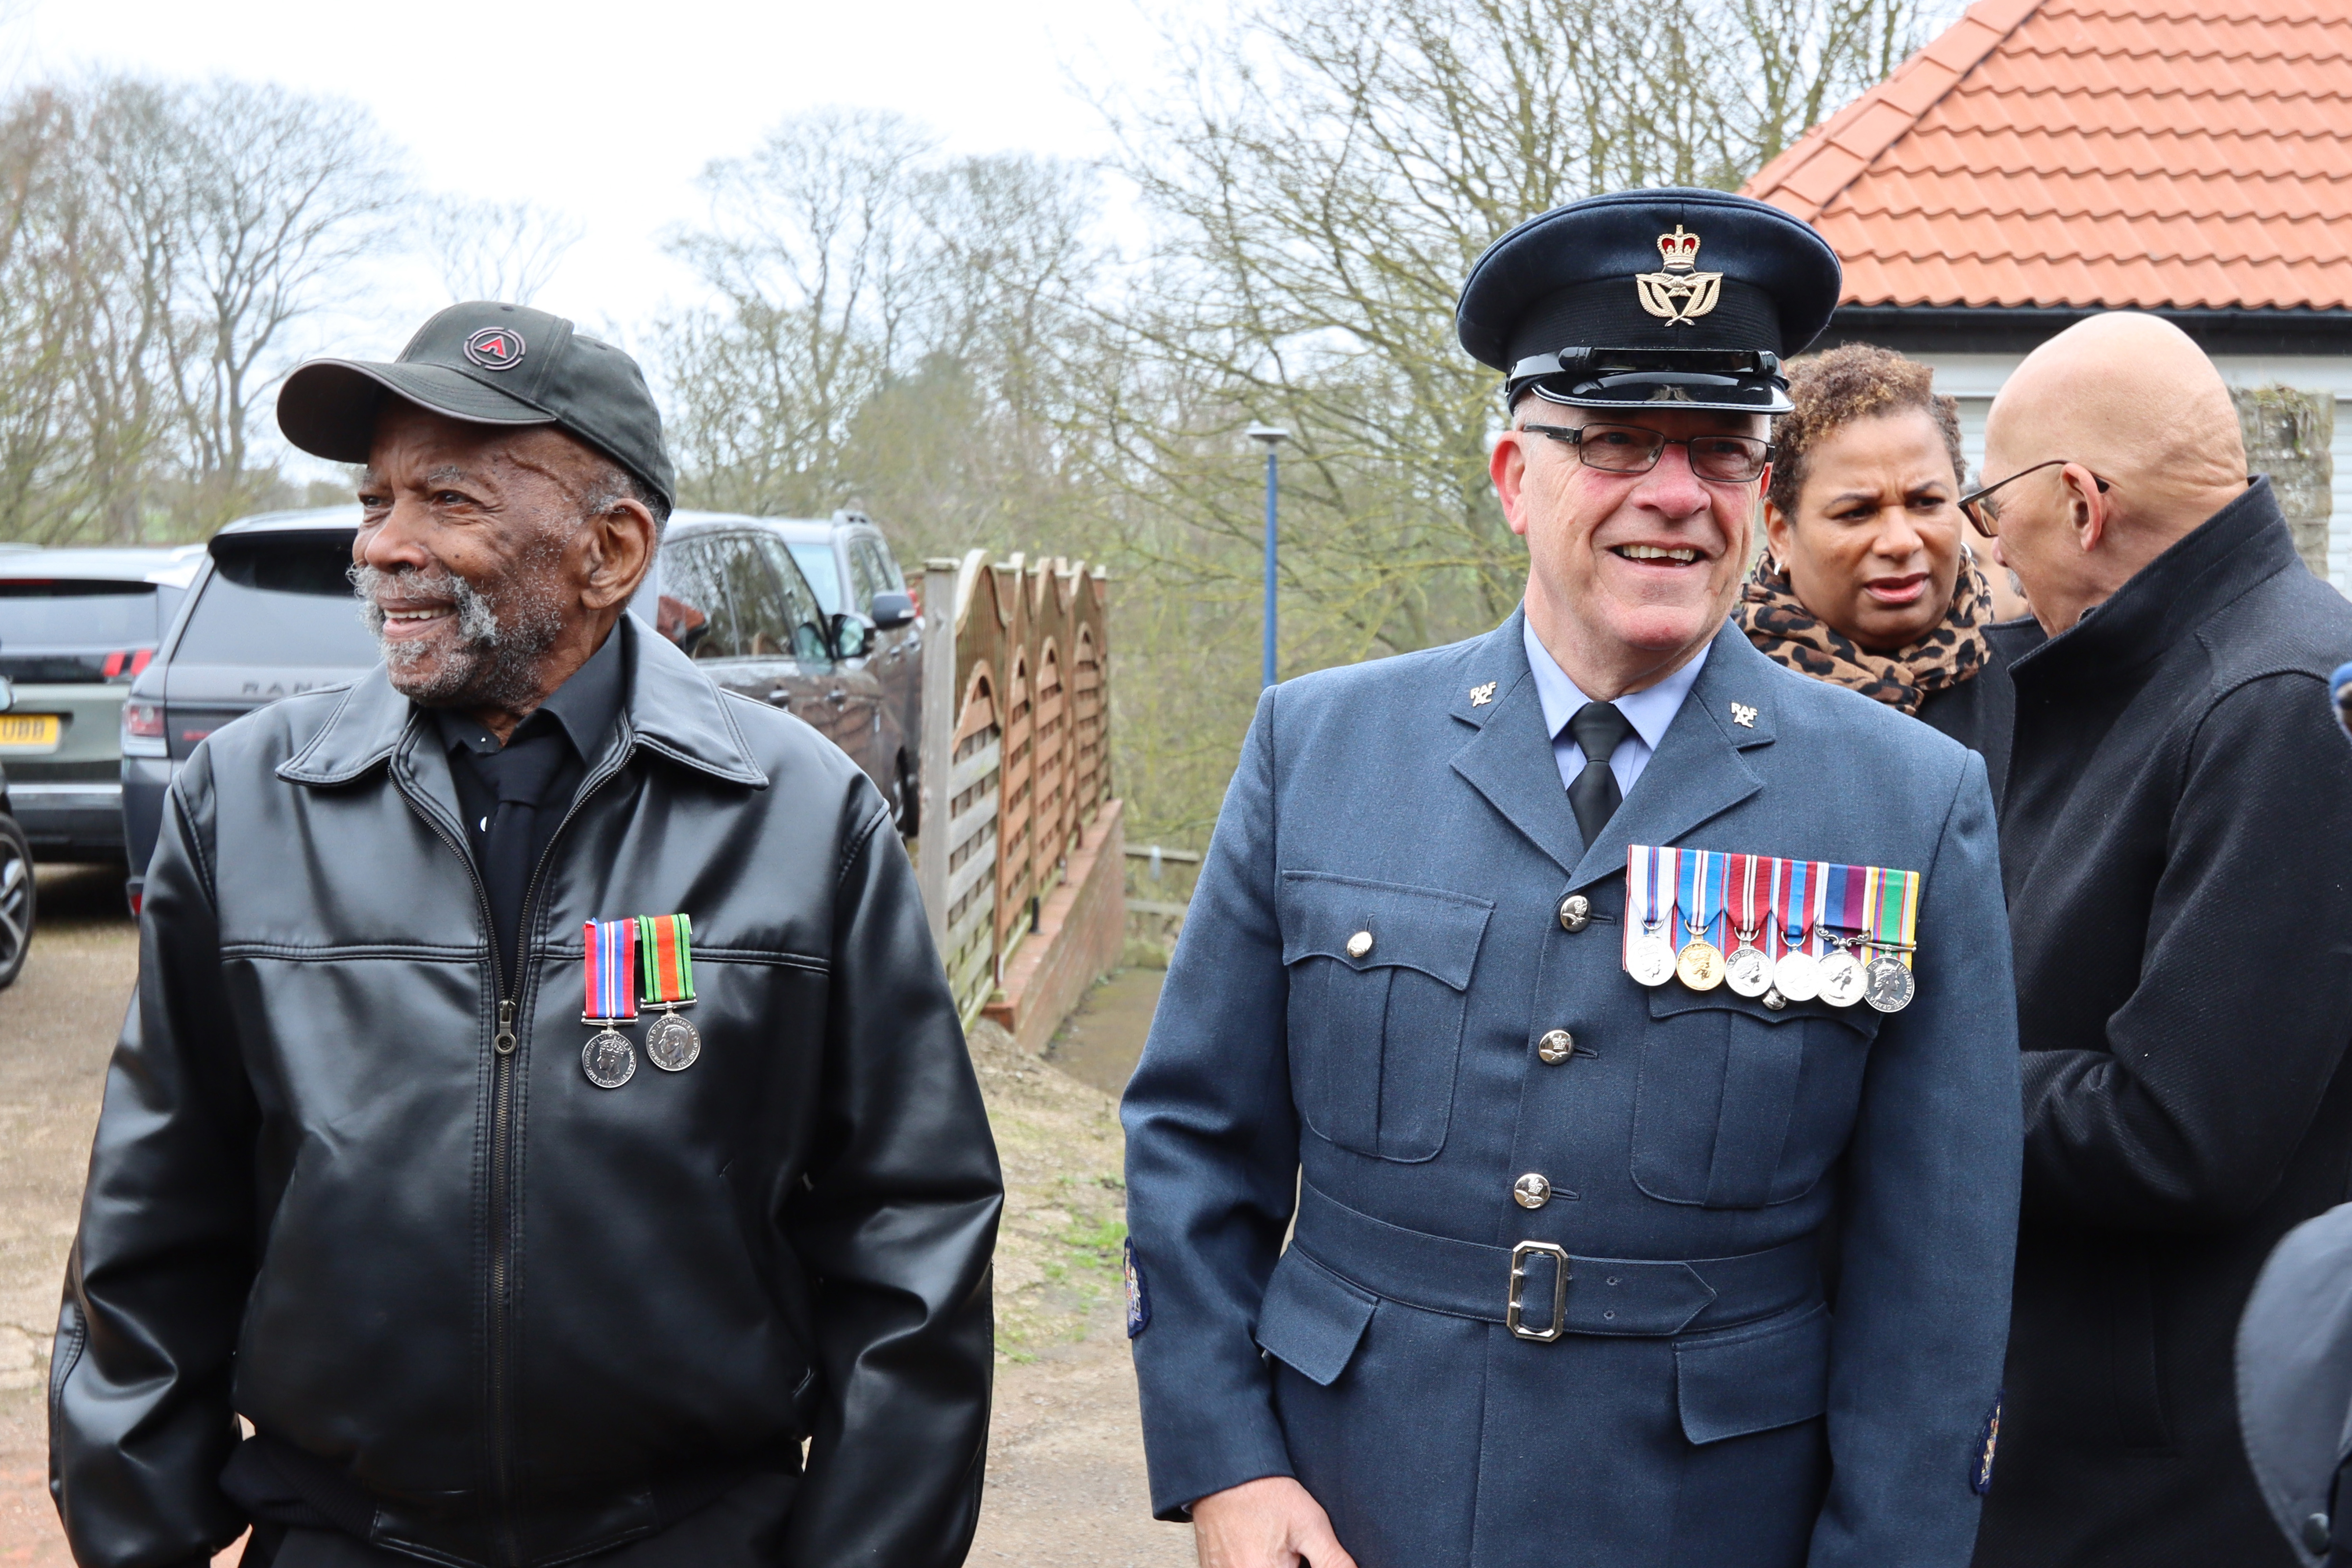 Image shows RAF personnel standing with civilians and veterans.